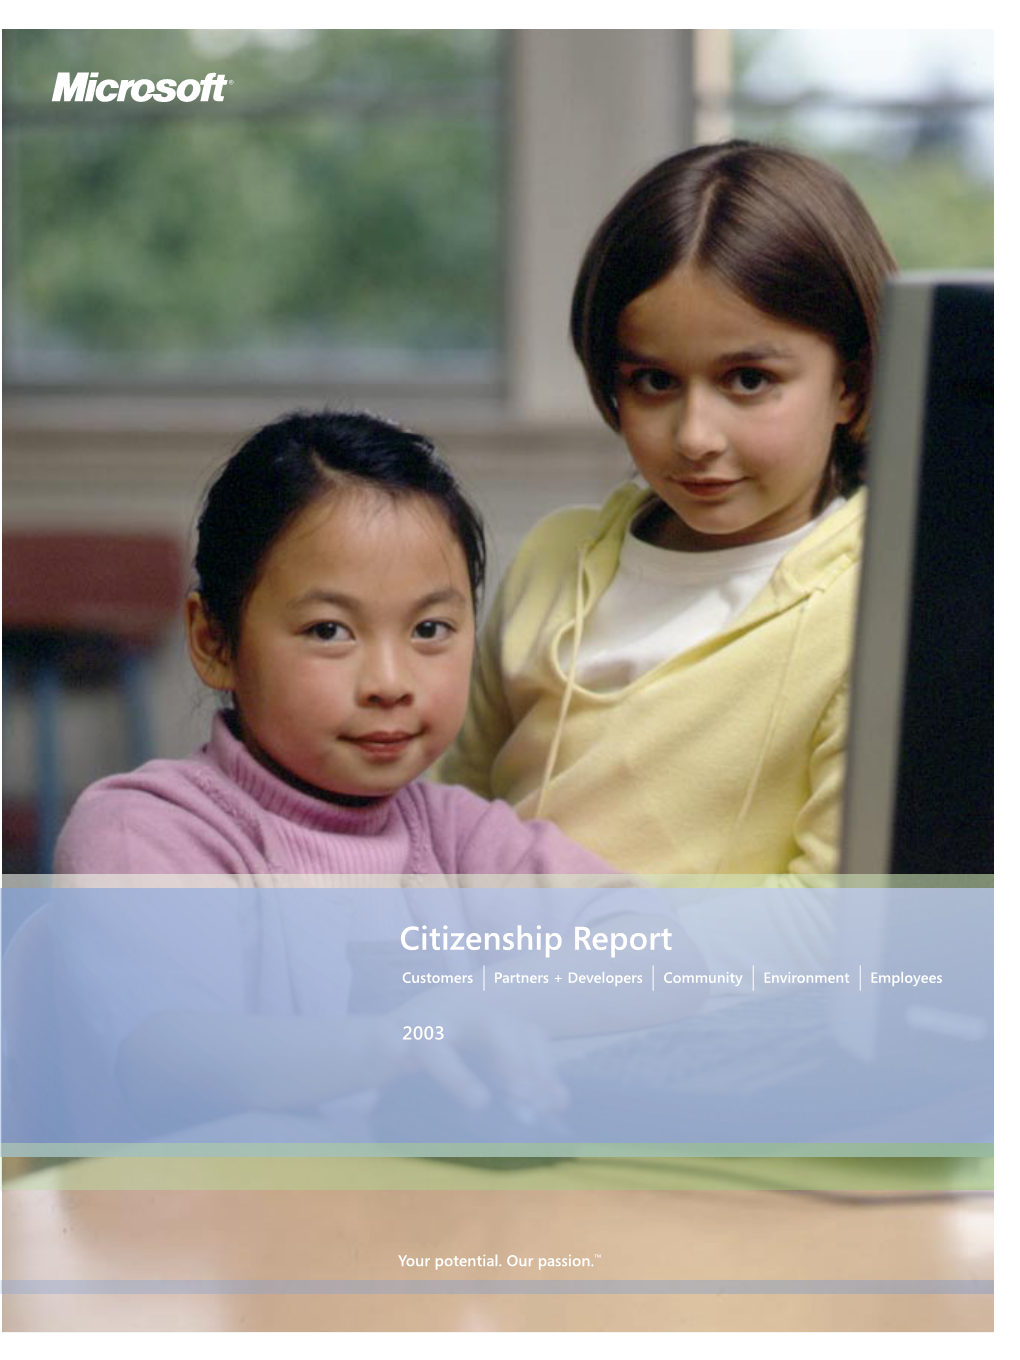 Citizenship Report Customers Partners + Developers Community Environment Employees